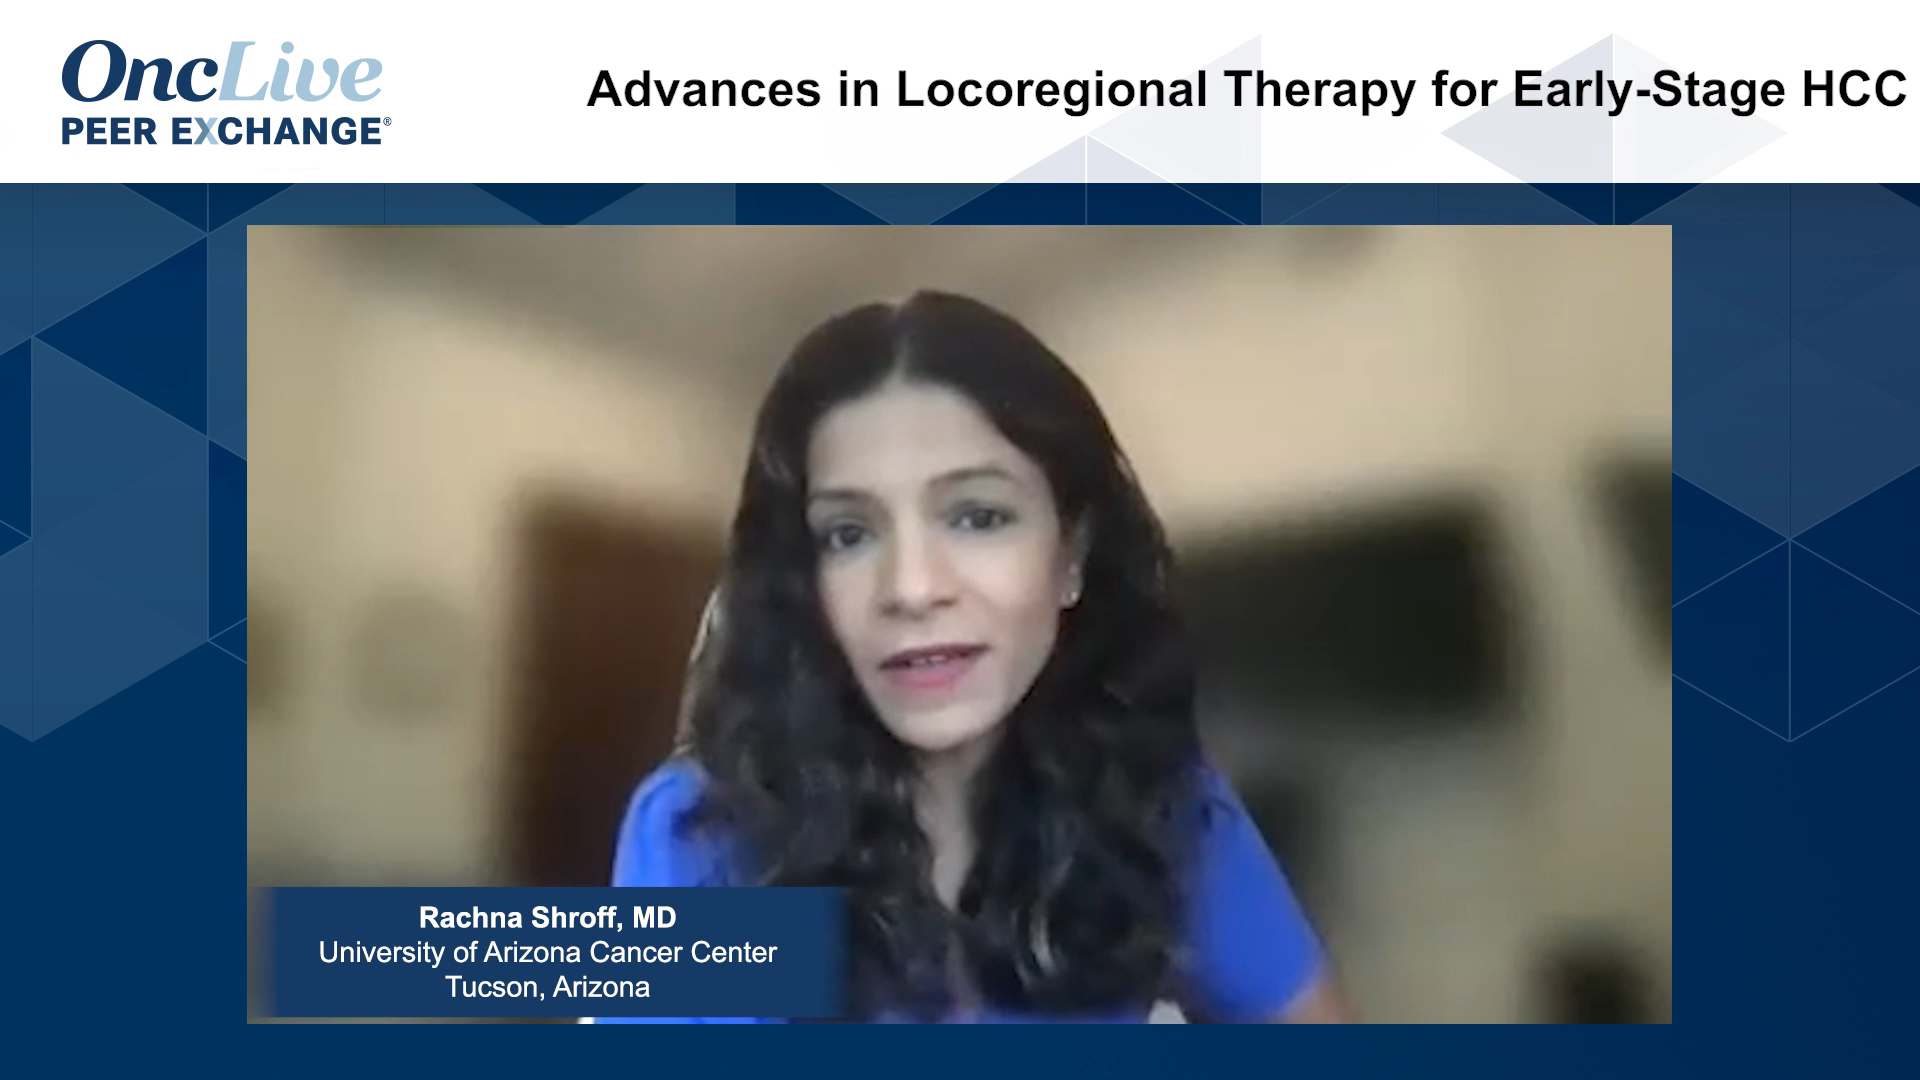 Advances in Locoregional Therapy for Early Stage HCC